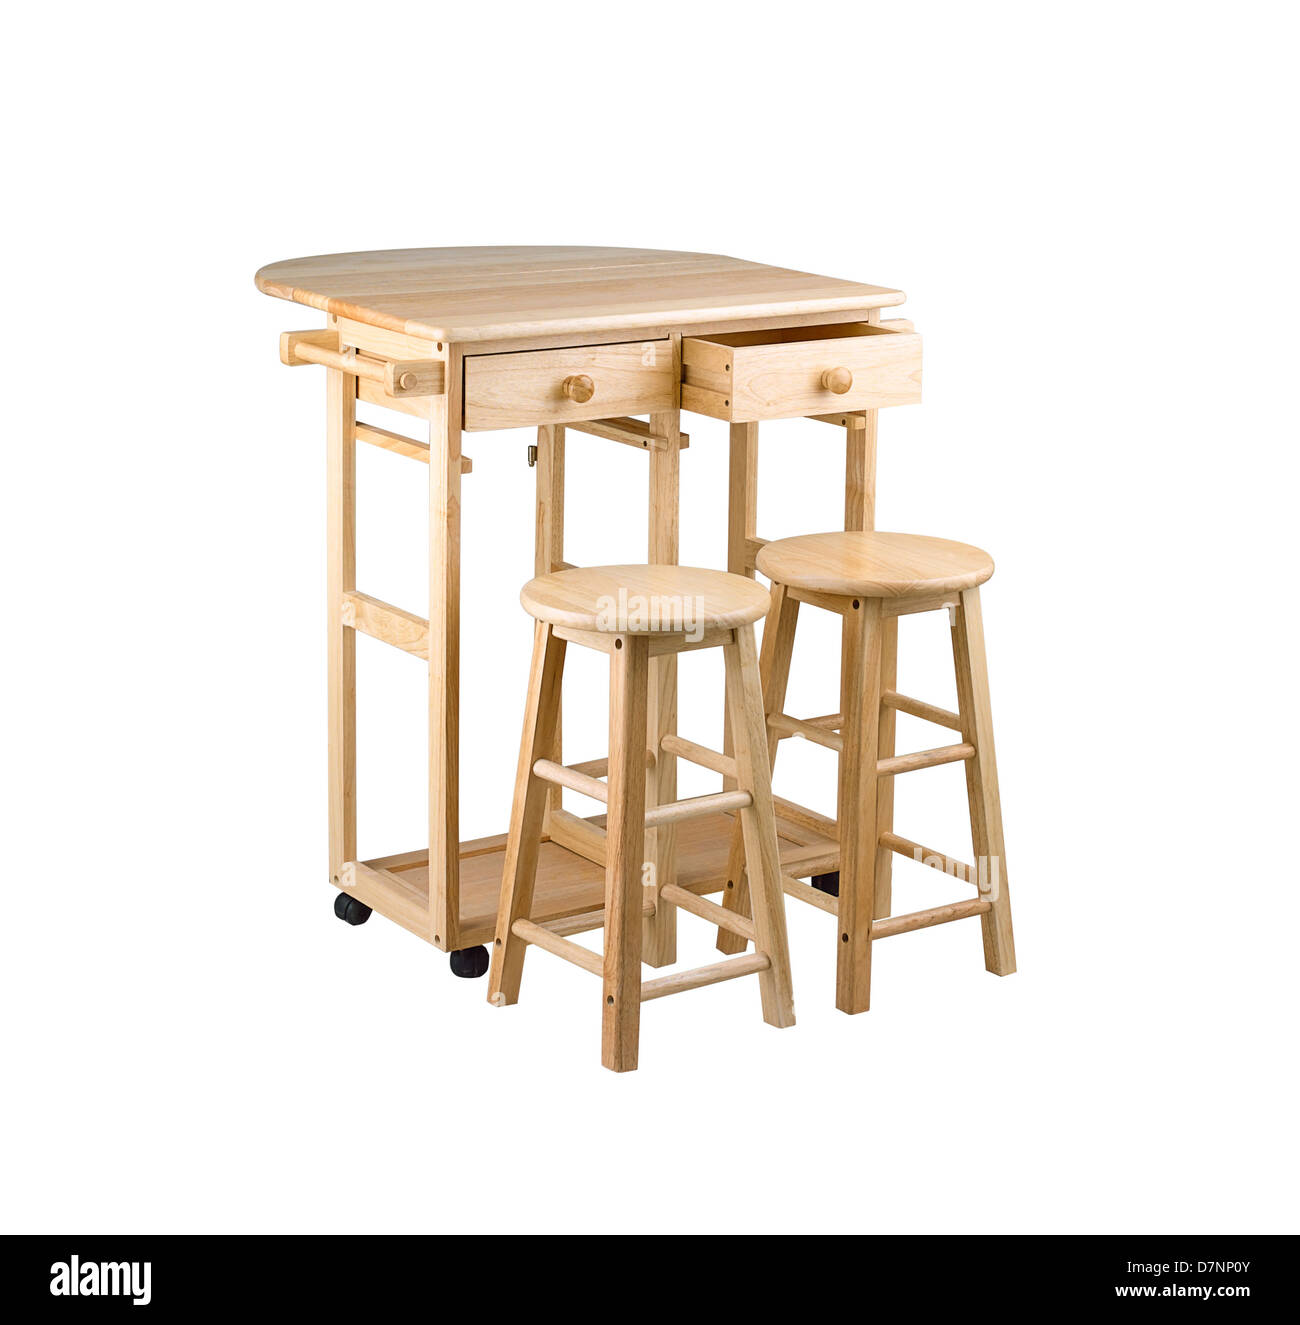 Folding and movable wooden table with drawers for small kitchen area Stock Photo